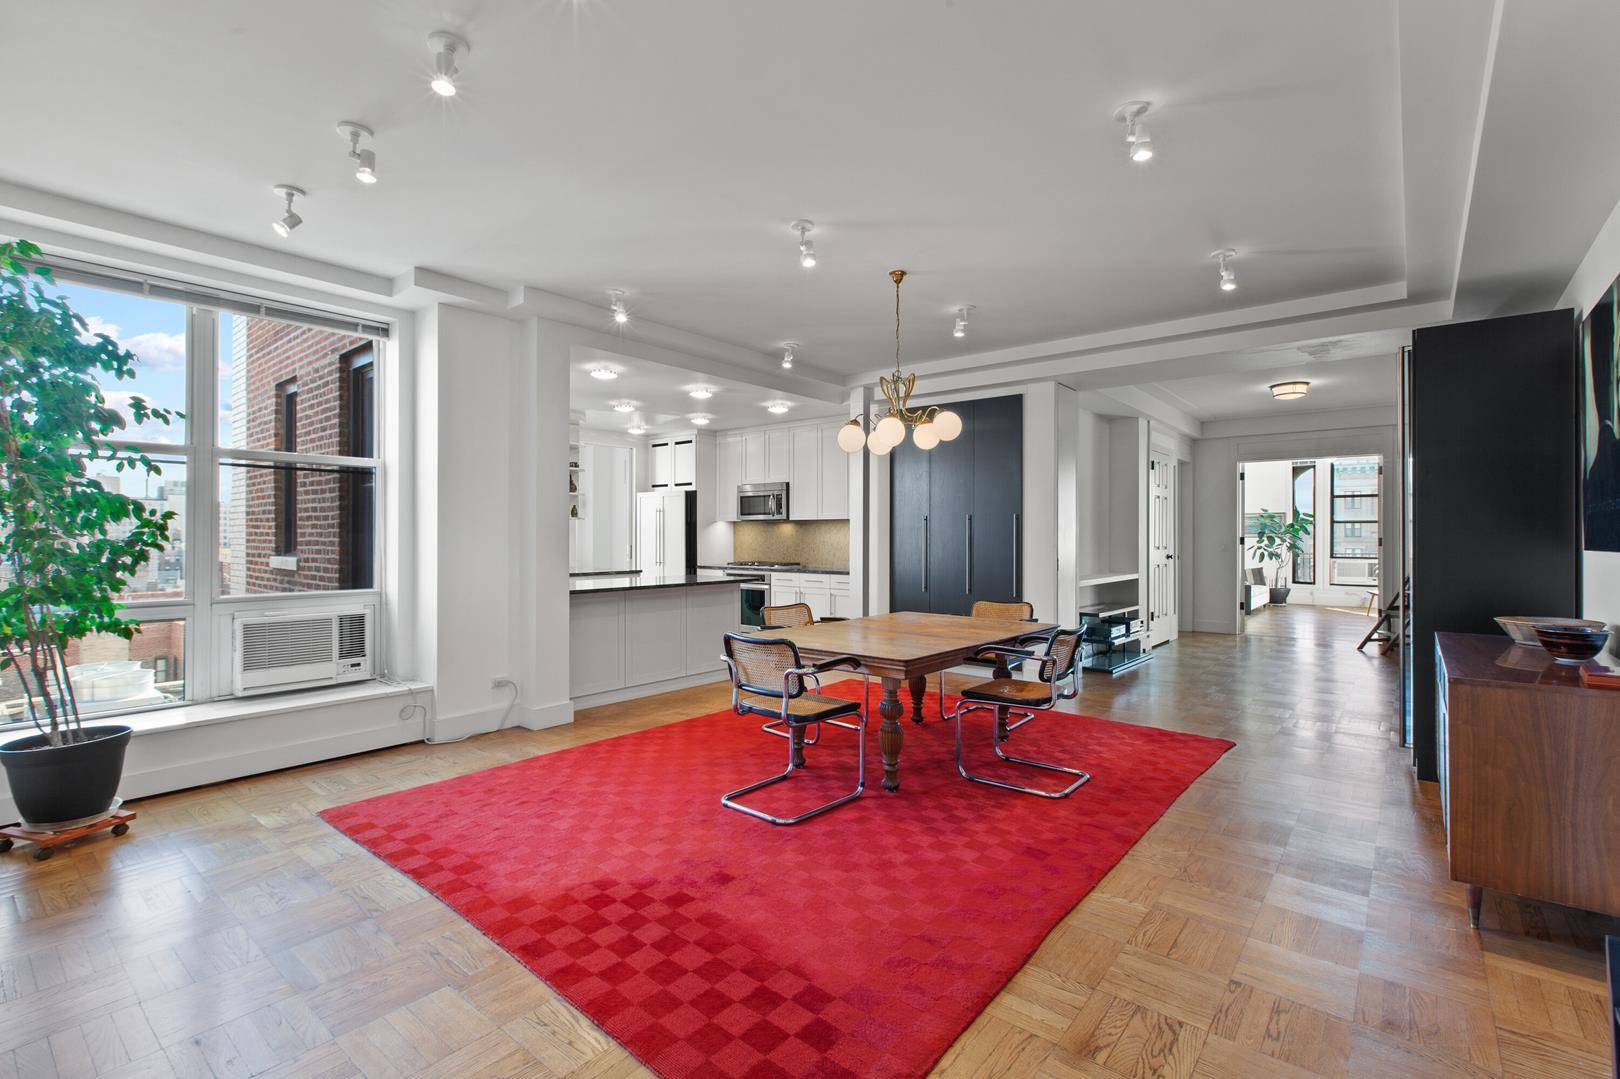 Magnificent Prewar Penthouse in the historic Hamilton in Morningside Heights awaits you.